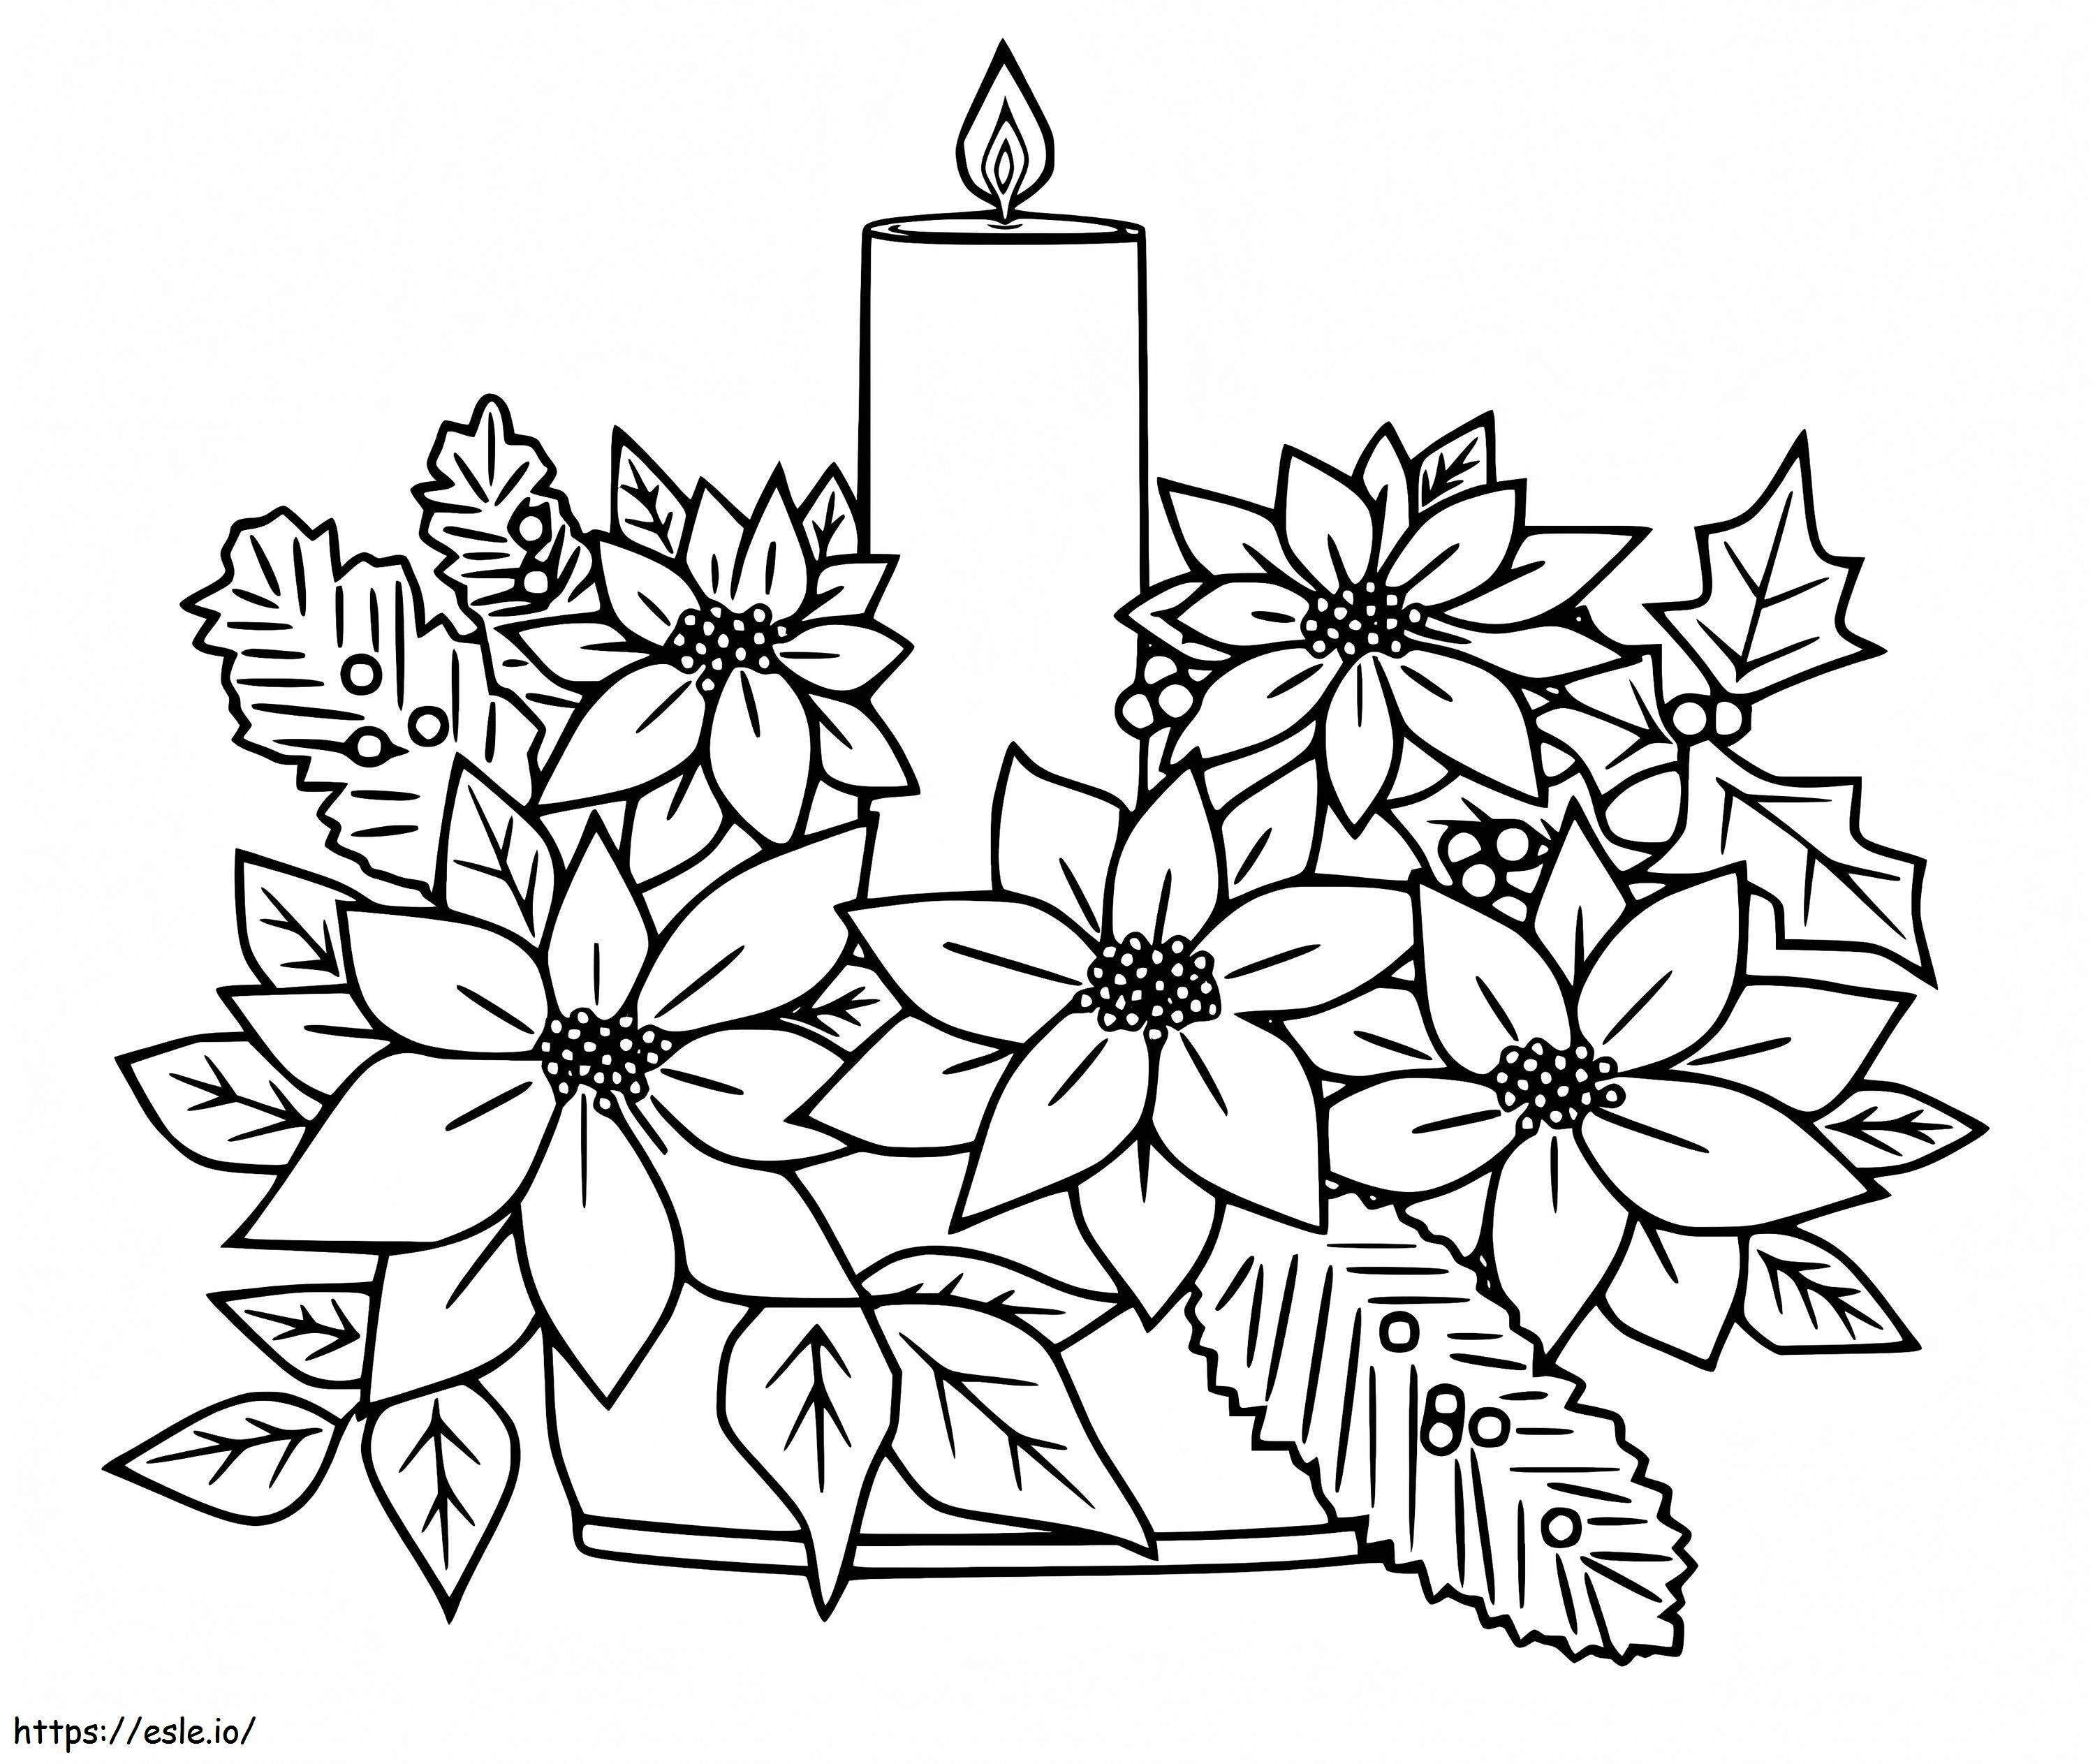 Poinsettias With Candle coloring page